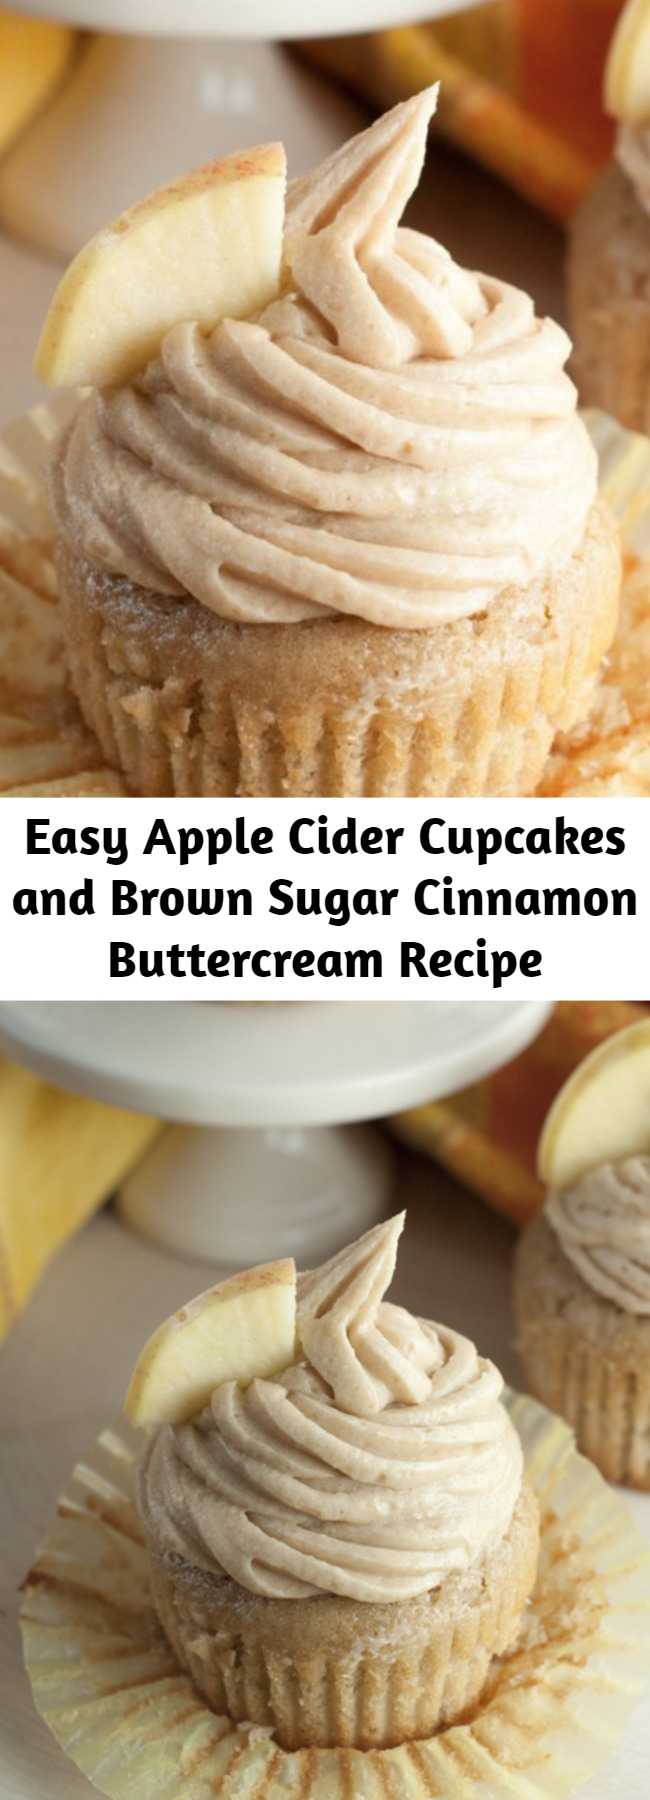 Easy Apple Cider Cupcakes and Brown Sugar Cinnamon Buttercream Recipe - Moist and flavorful recipe for Apple Cider Cupcakes made from scratch with Brown Sugar Cinnamon Buttercream Frosting makes for a mouthwatering fall dessert!